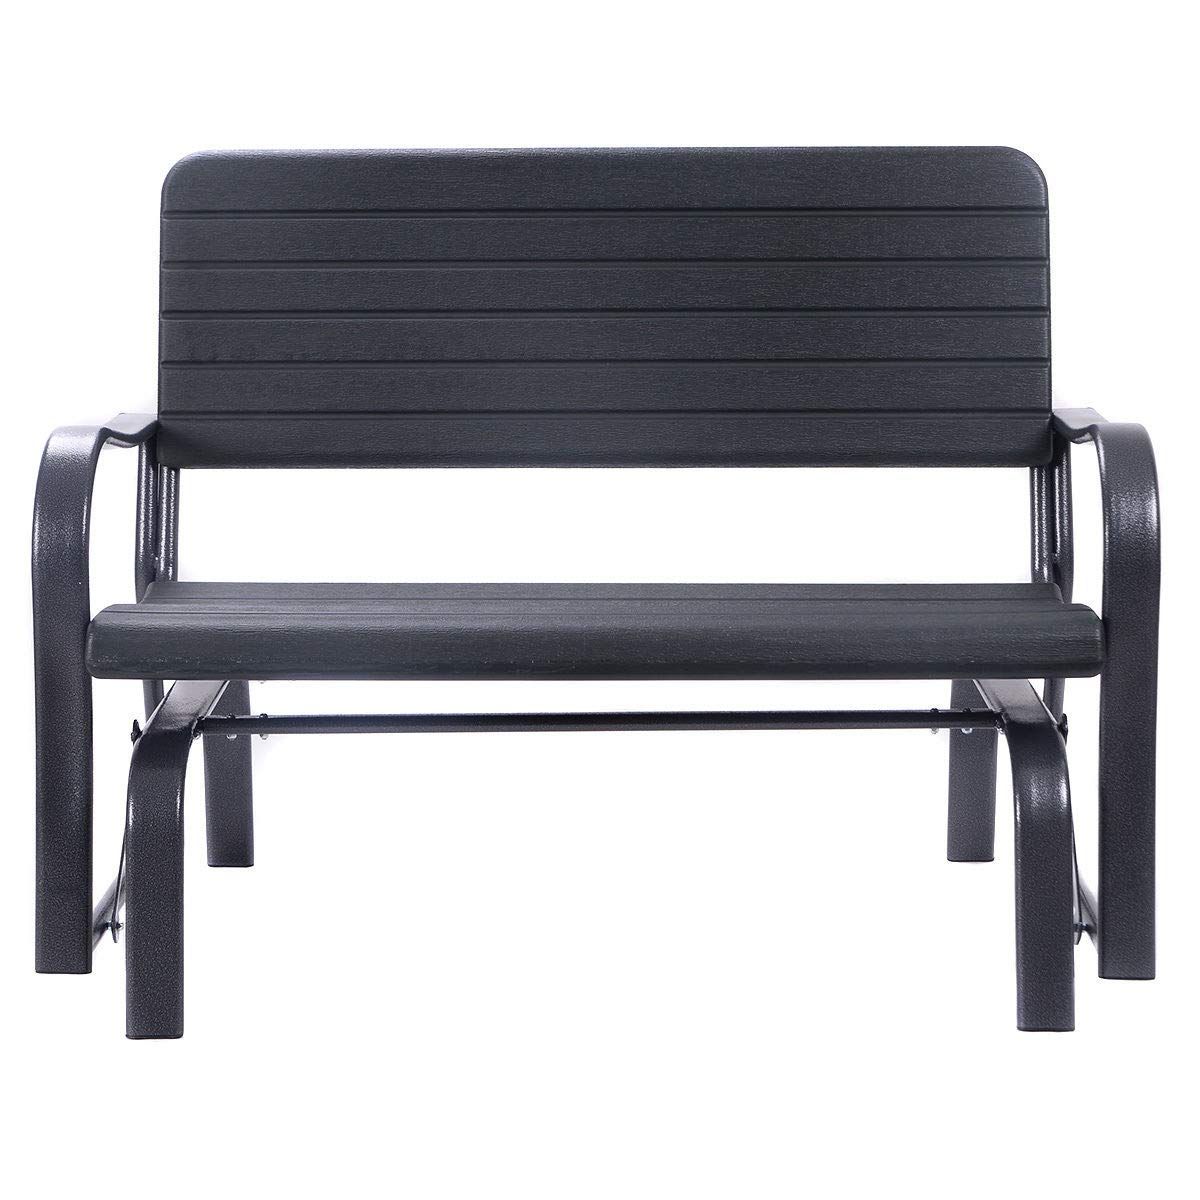 Amazon : Kchex>outdoor Patio Swing Porch Rocker Glider Throughout Recent Outdoor Steel Patio Swing Glider Benches (View 16 of 30)